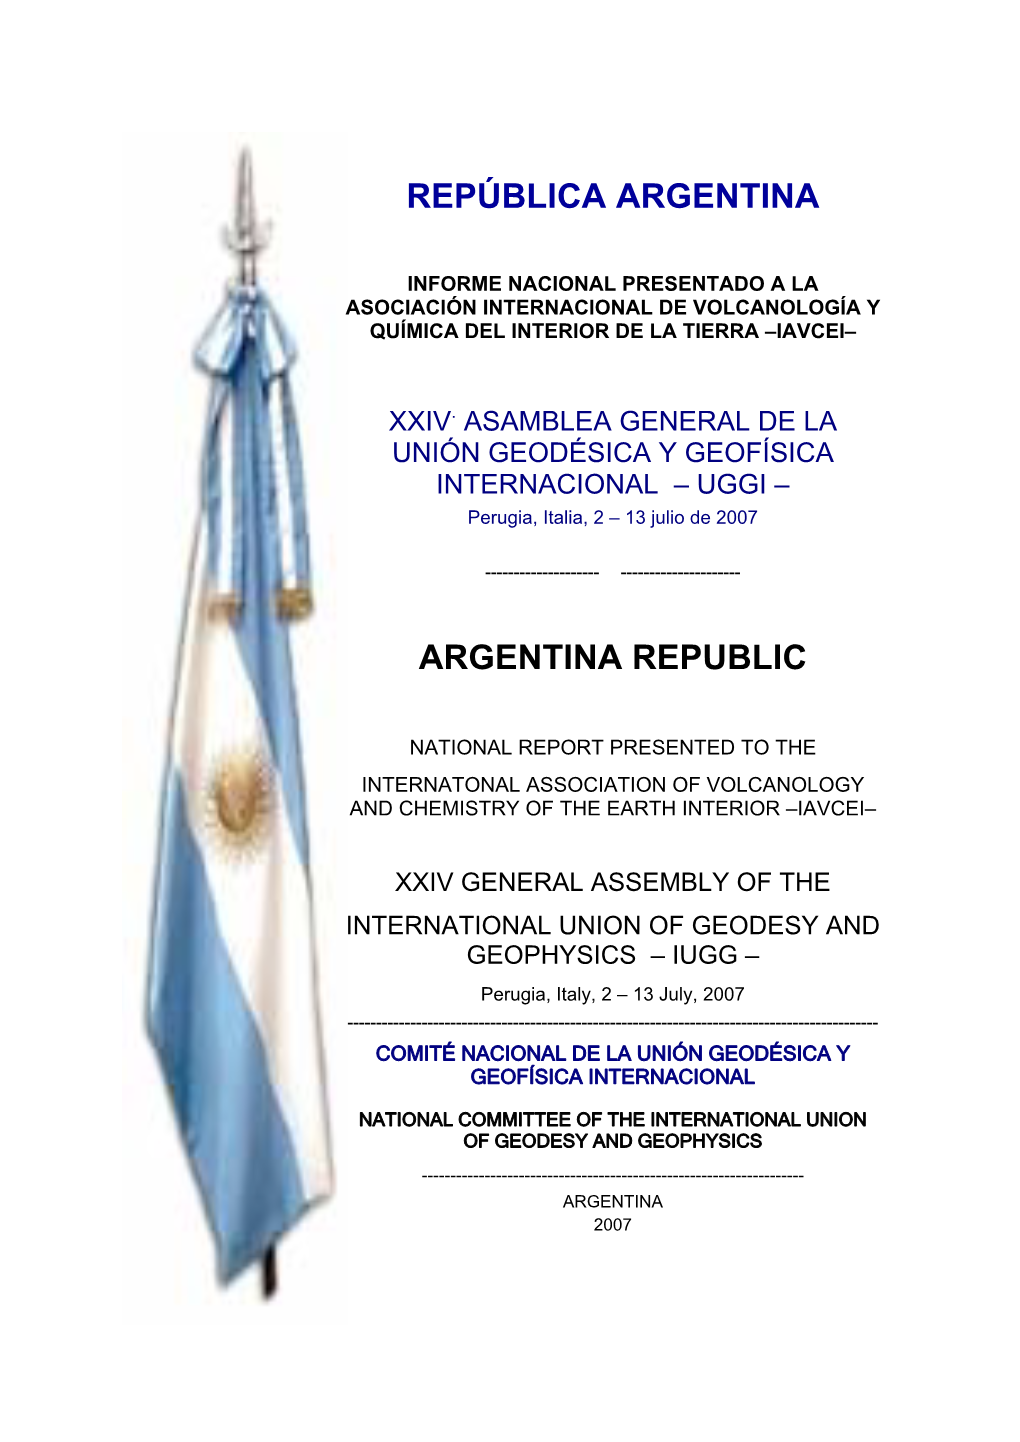 Argentine National Report 1999-2003